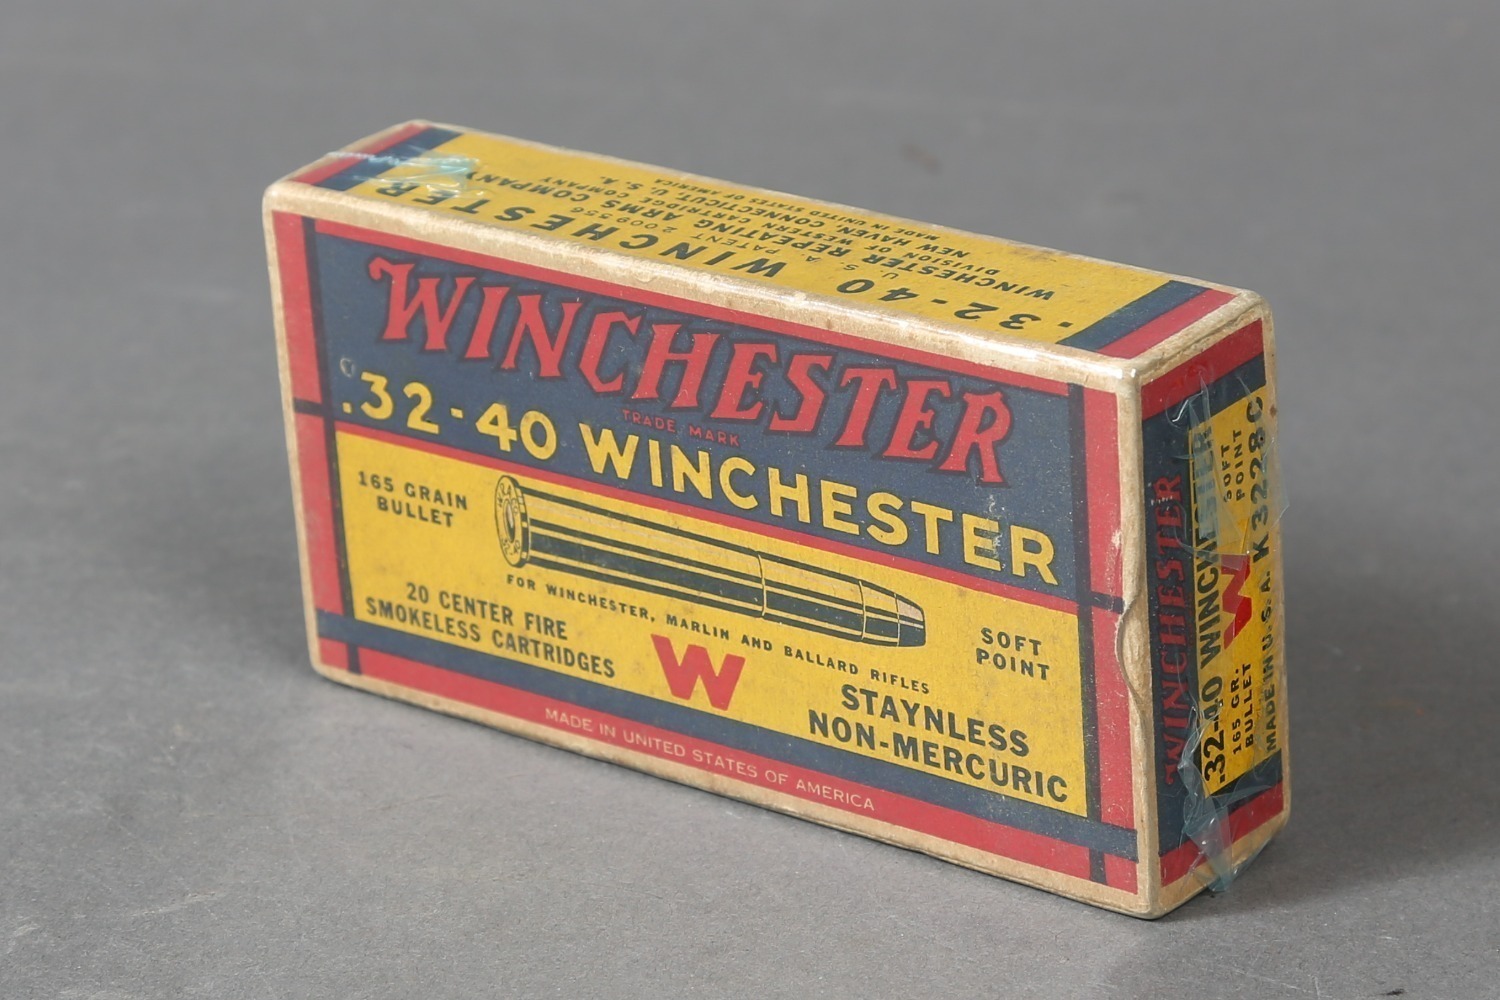 1 Bx Vintage Winchester .32-40 Win Ammo